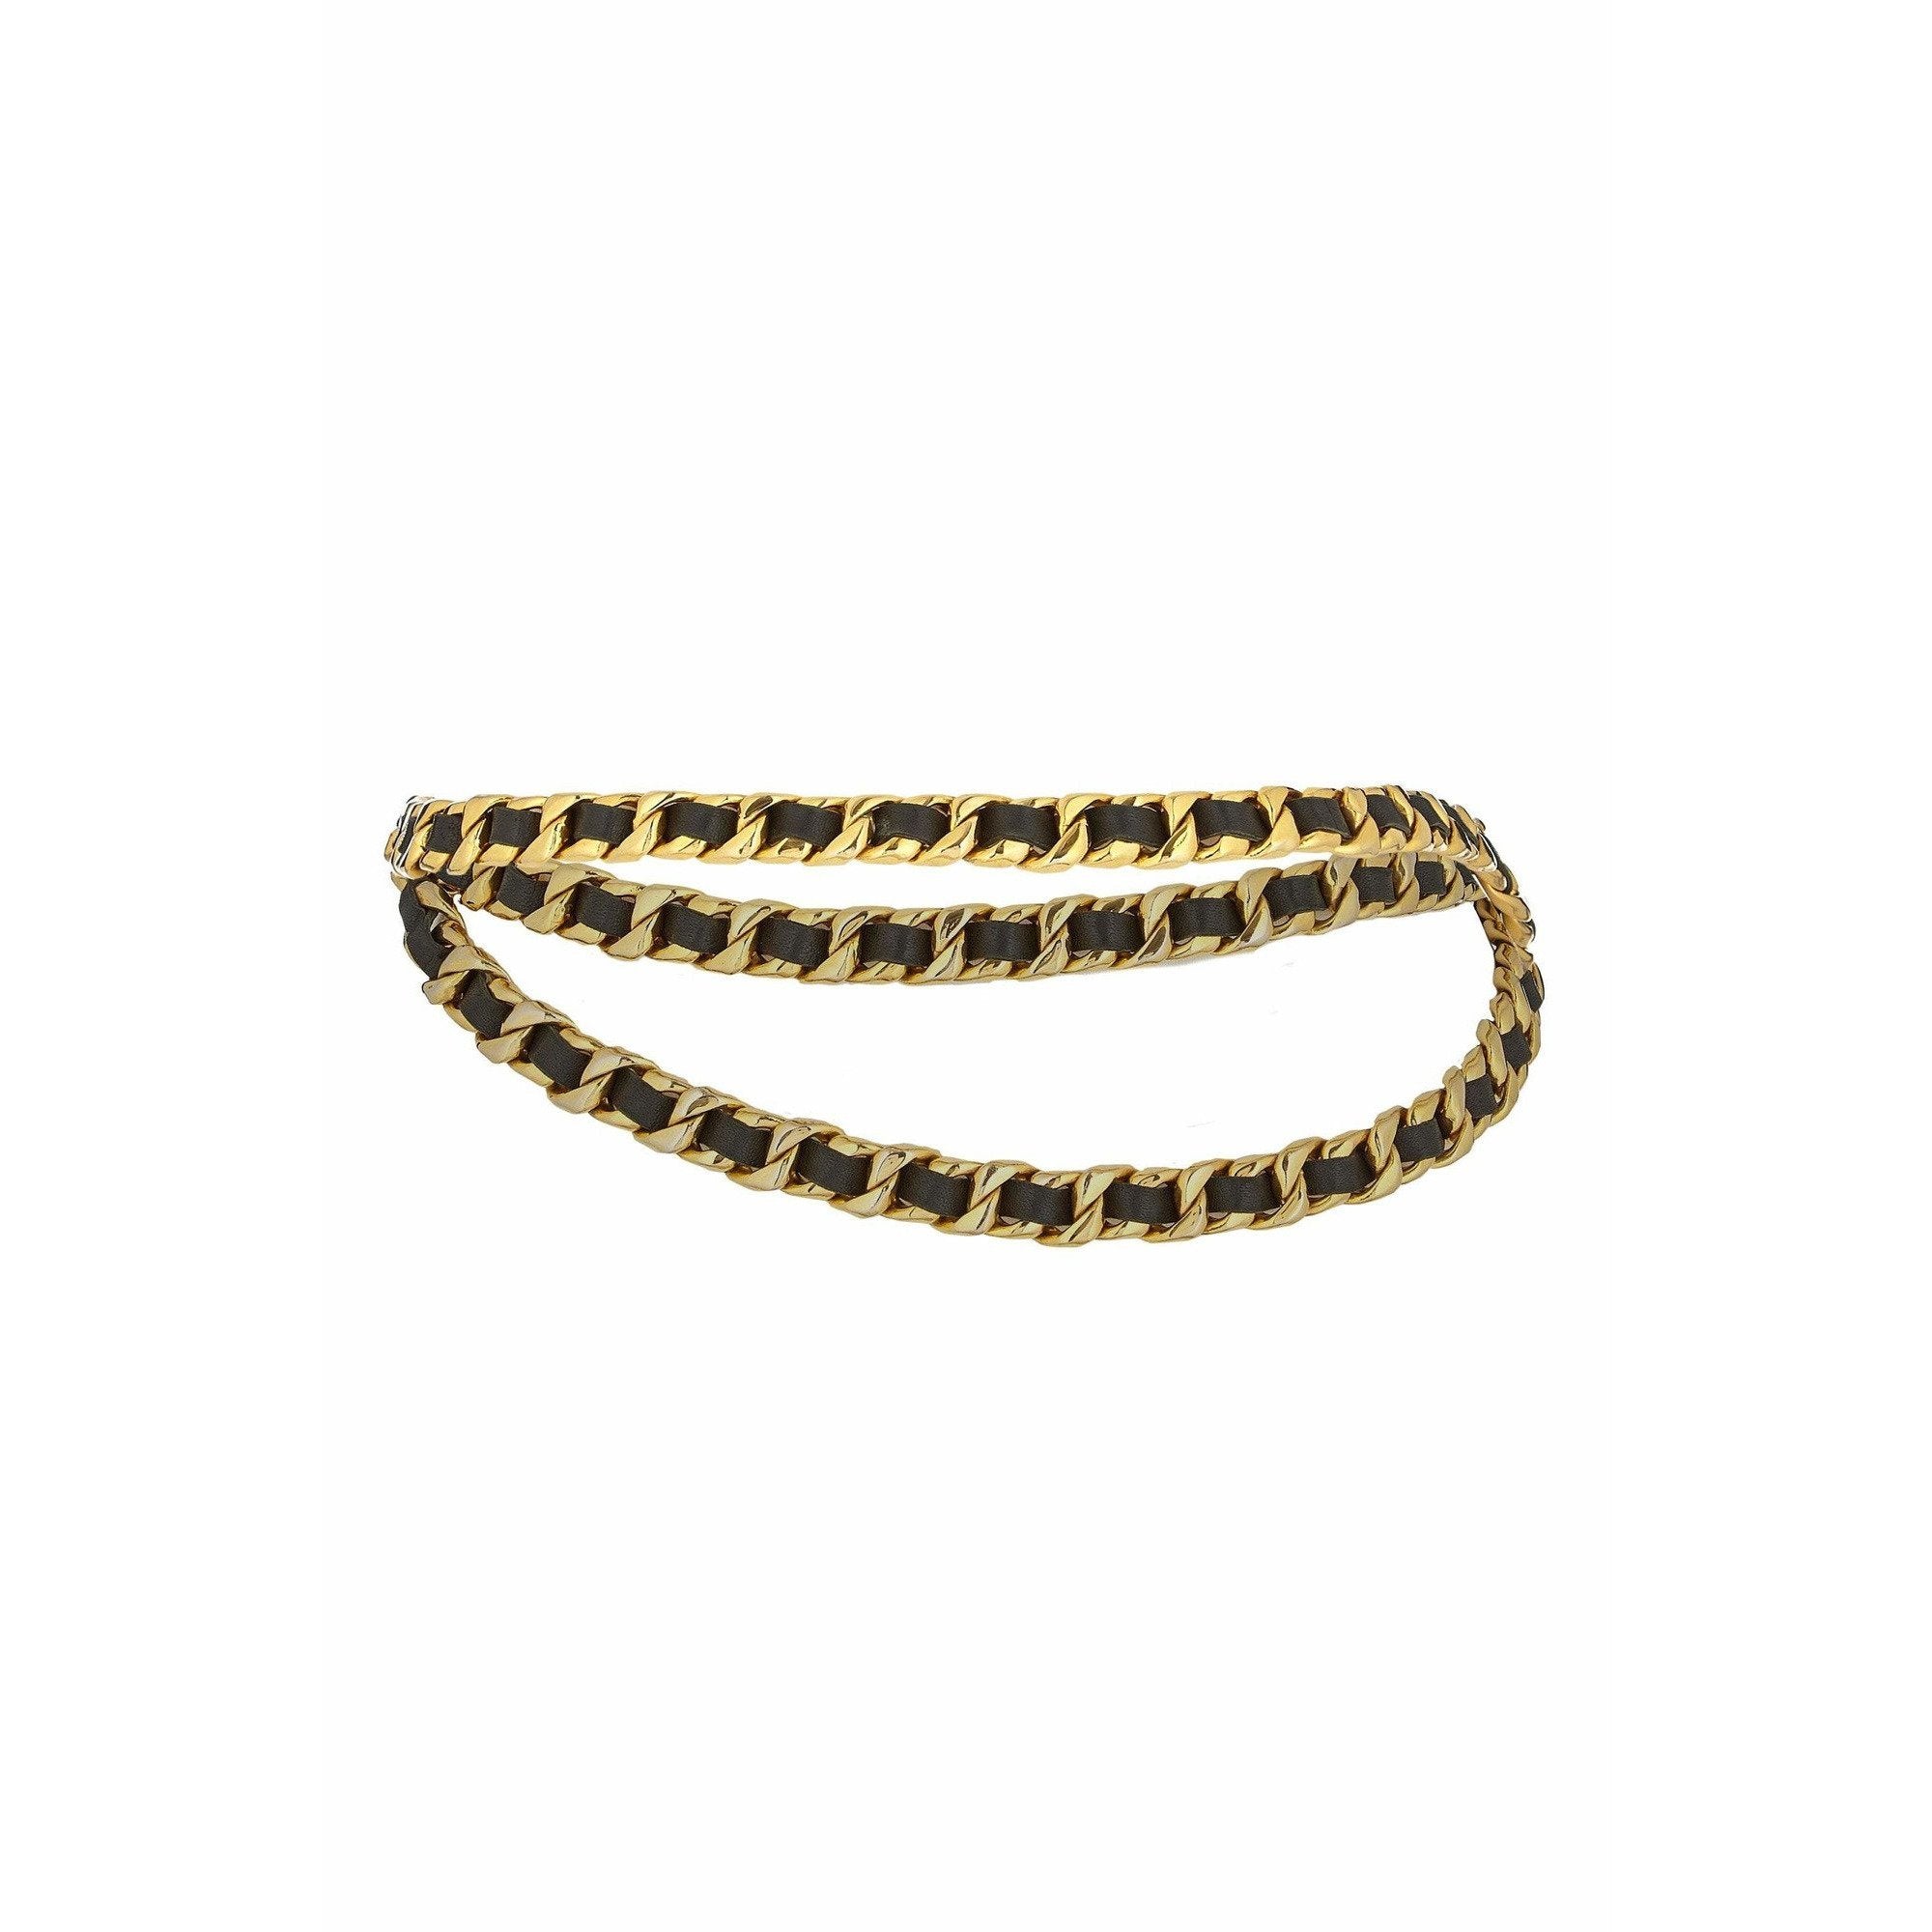 ARCHIVE - Chanel 1980s Classic Heavy Gold Tone and Black Leather Chain